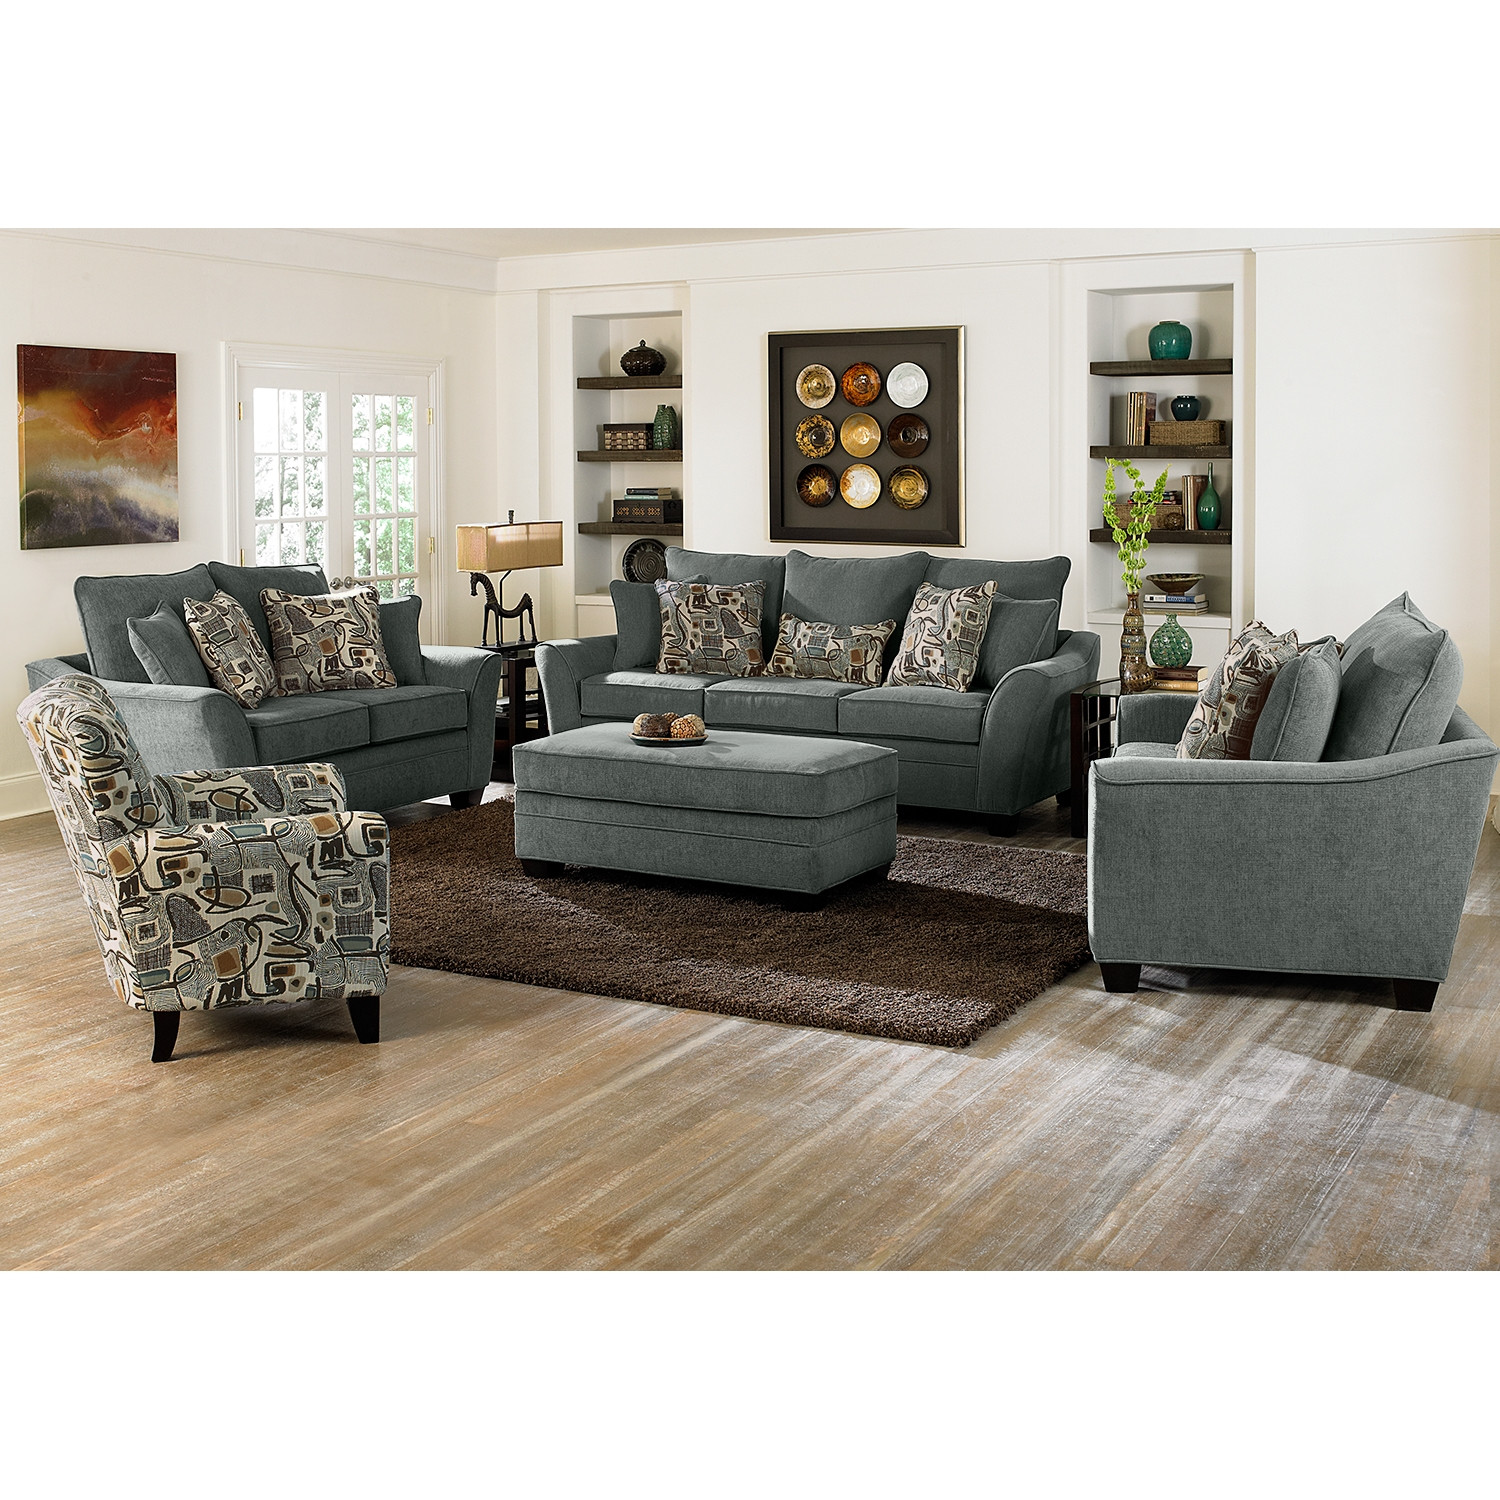 Living Room Recliner Chair
 Perfect Chairs With Ottomans For Living Room – HomesFeed